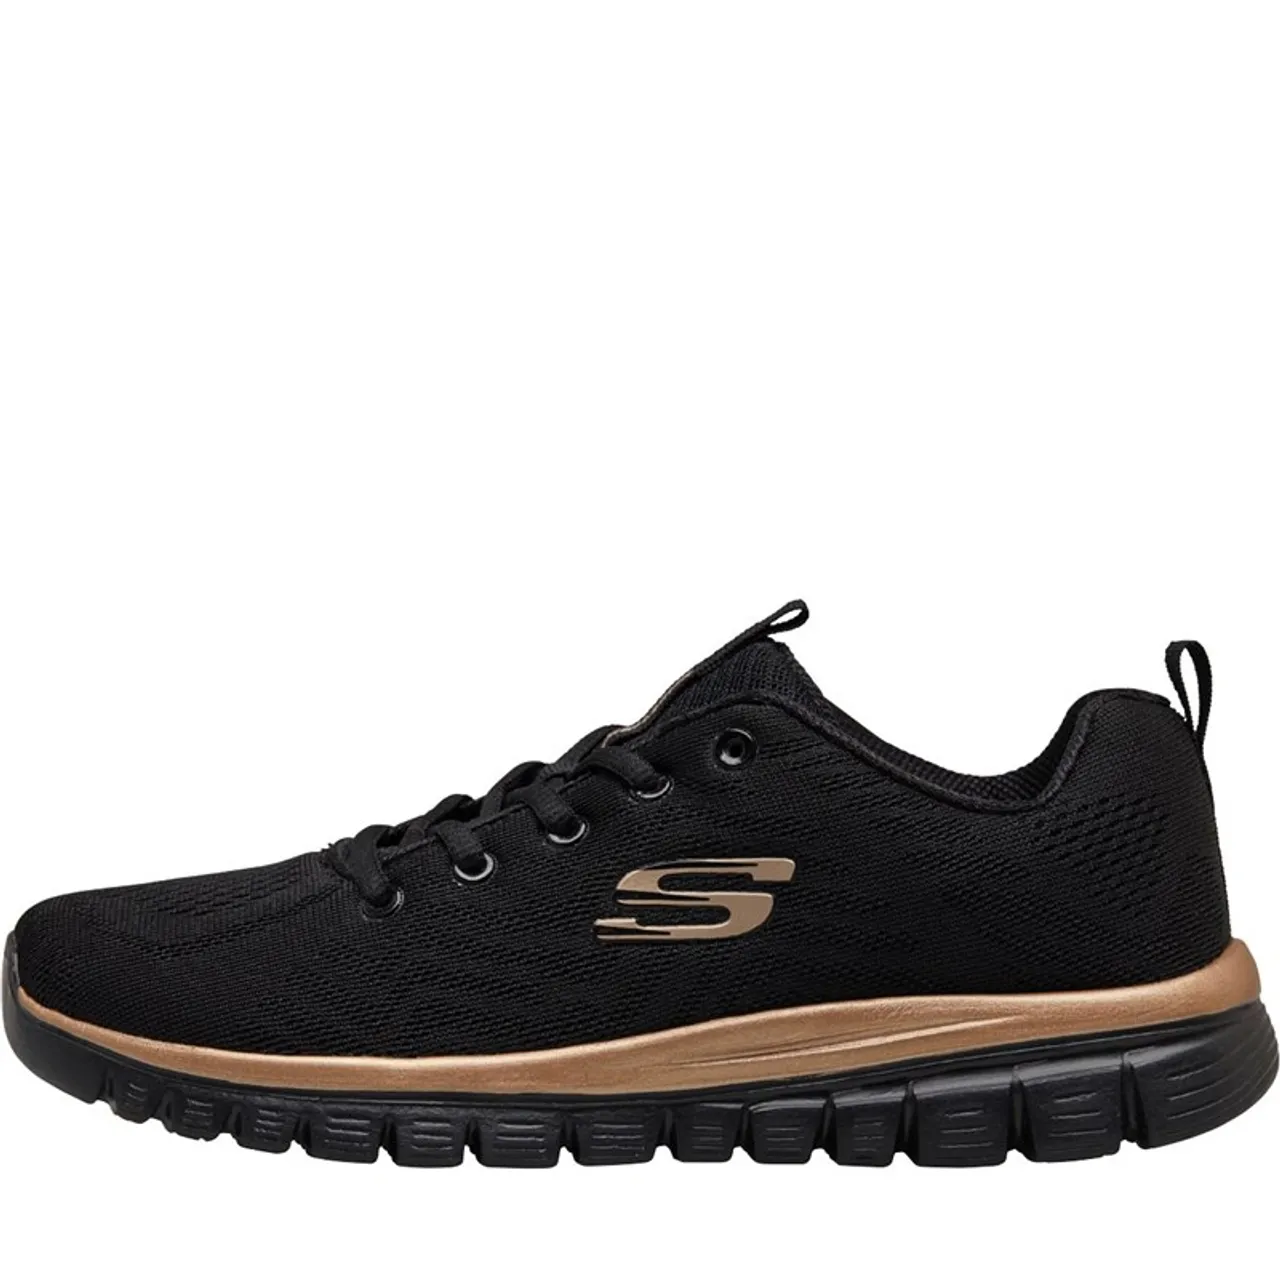 SKECHERS Womens Graceful Get Connected Trainers Black/Rose Gold